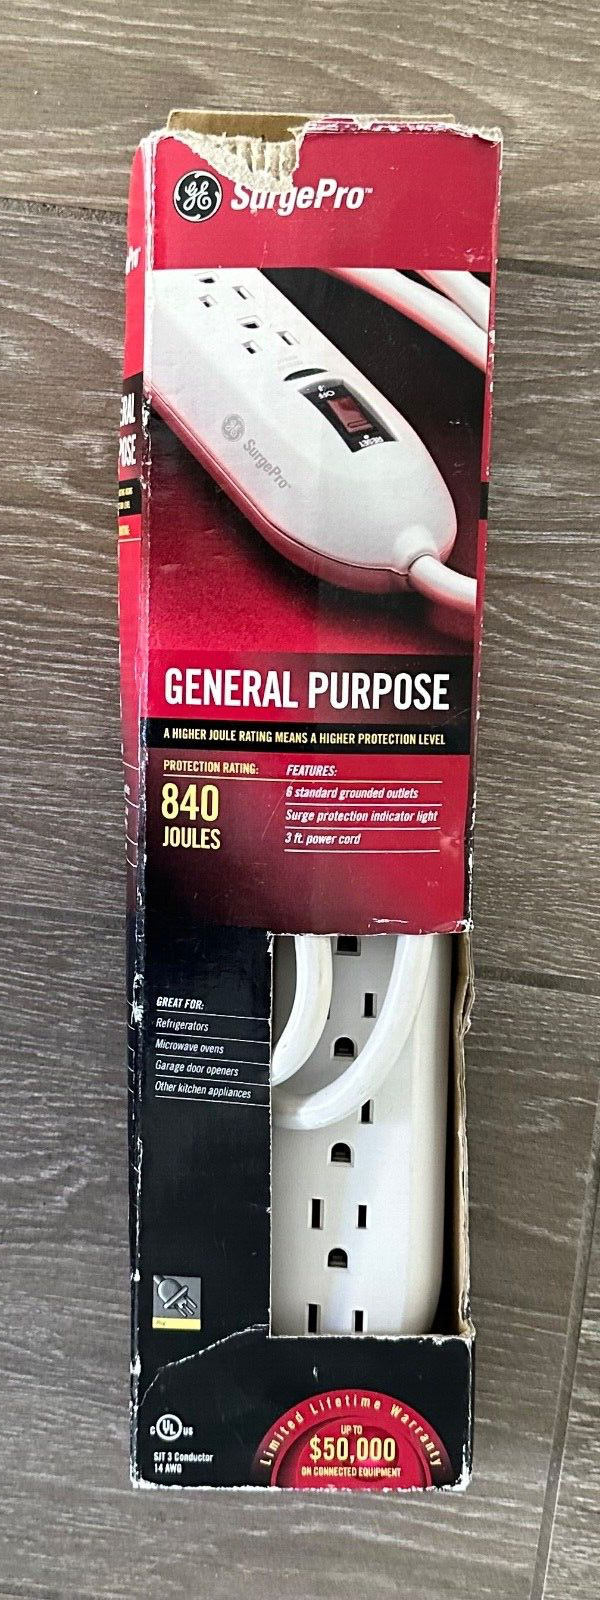 GE SurgePro 8 Grounded Outlet and Cord 840 Joules 3 Foot Cord